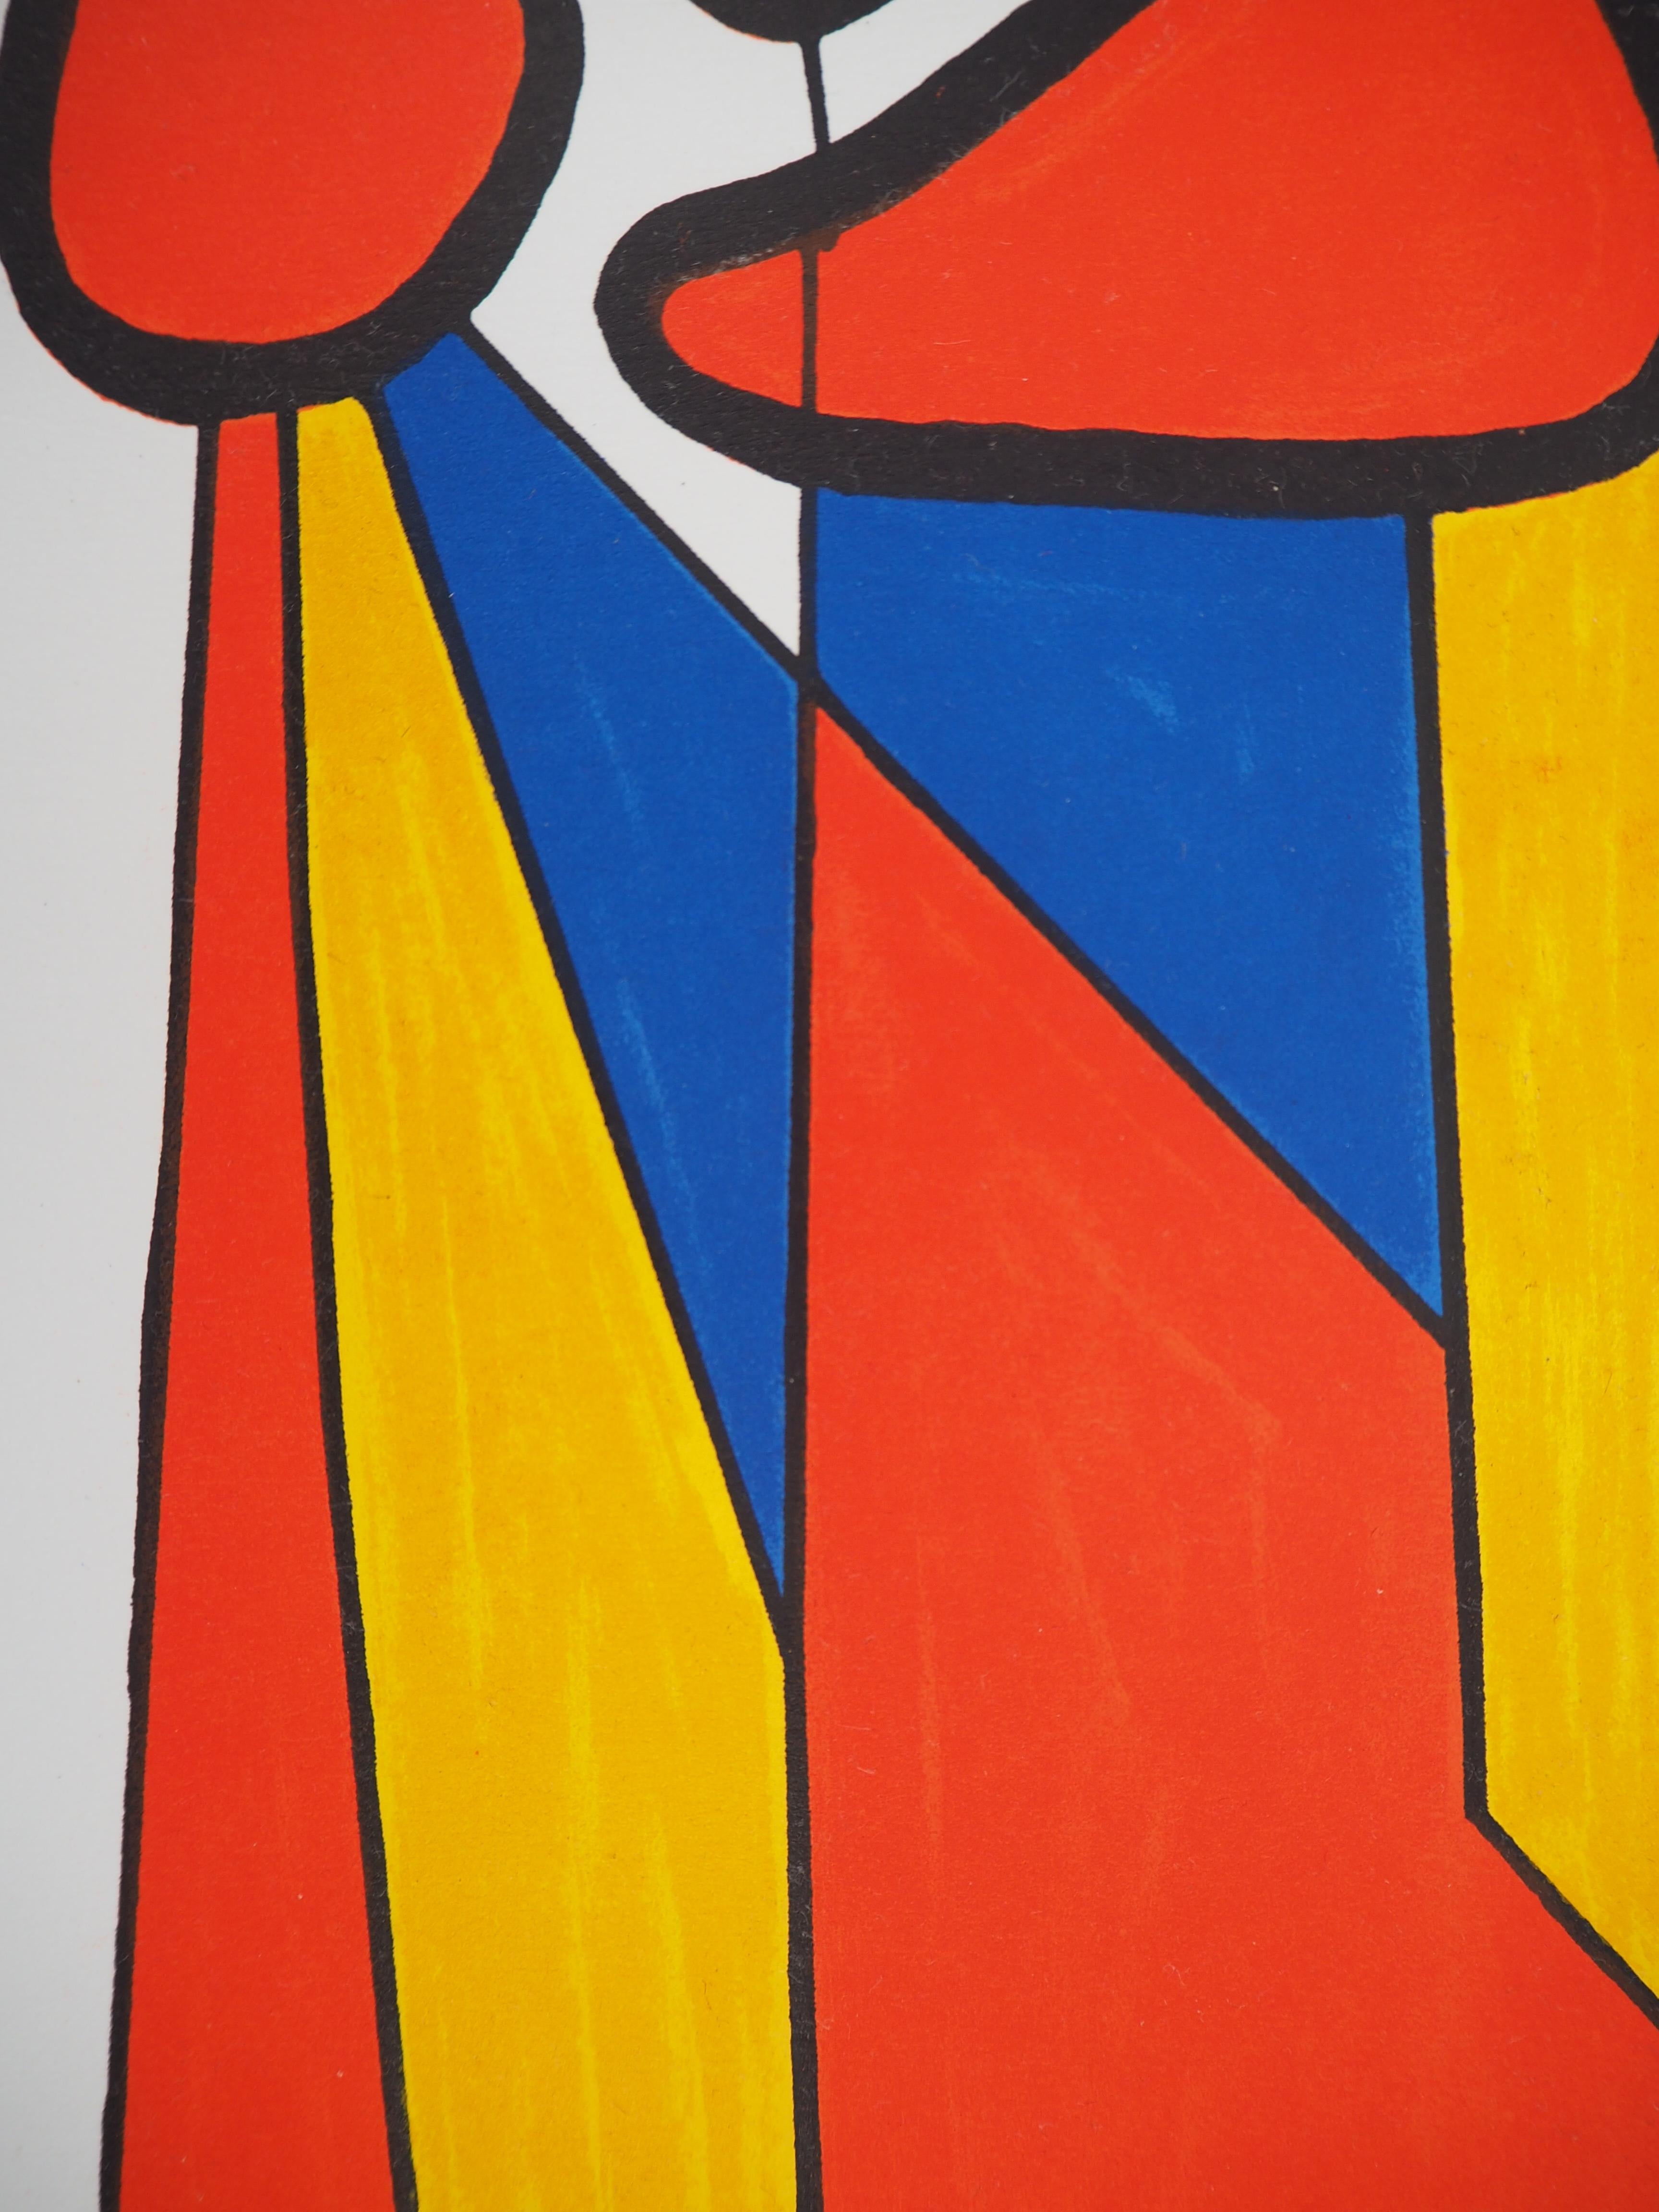 Alexander Calder
Composition in Red, Yellow and Blue, 1972

Original Lithograph (4 color stones)
Printed in Mourlot workshop
On vellum 31 x 24 cm (c. 12,2 x 9,5 in)
Edited by San Lazzaro in 1972 ; unsigned and unumbered as issued

Excellent